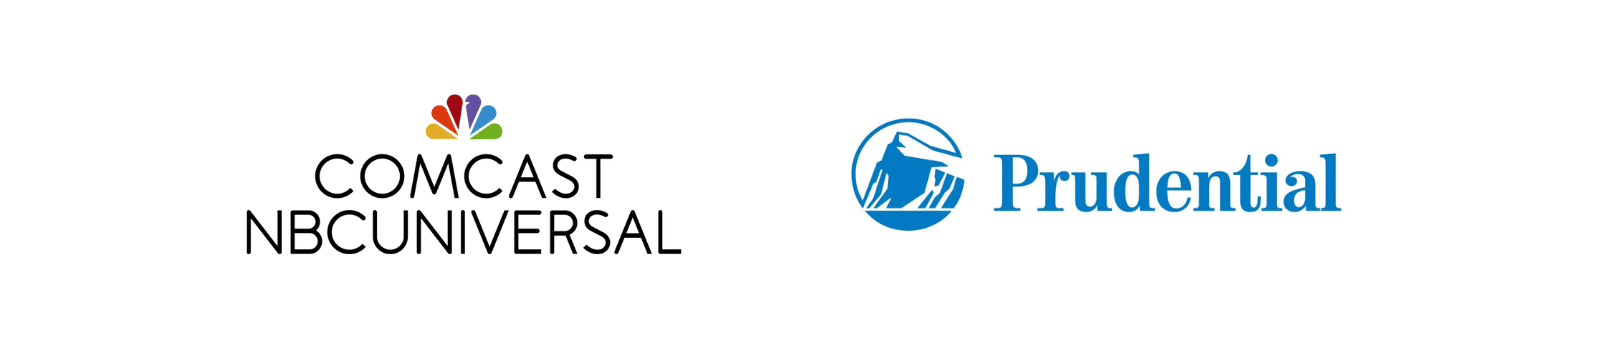 Comcast and Prudential logos